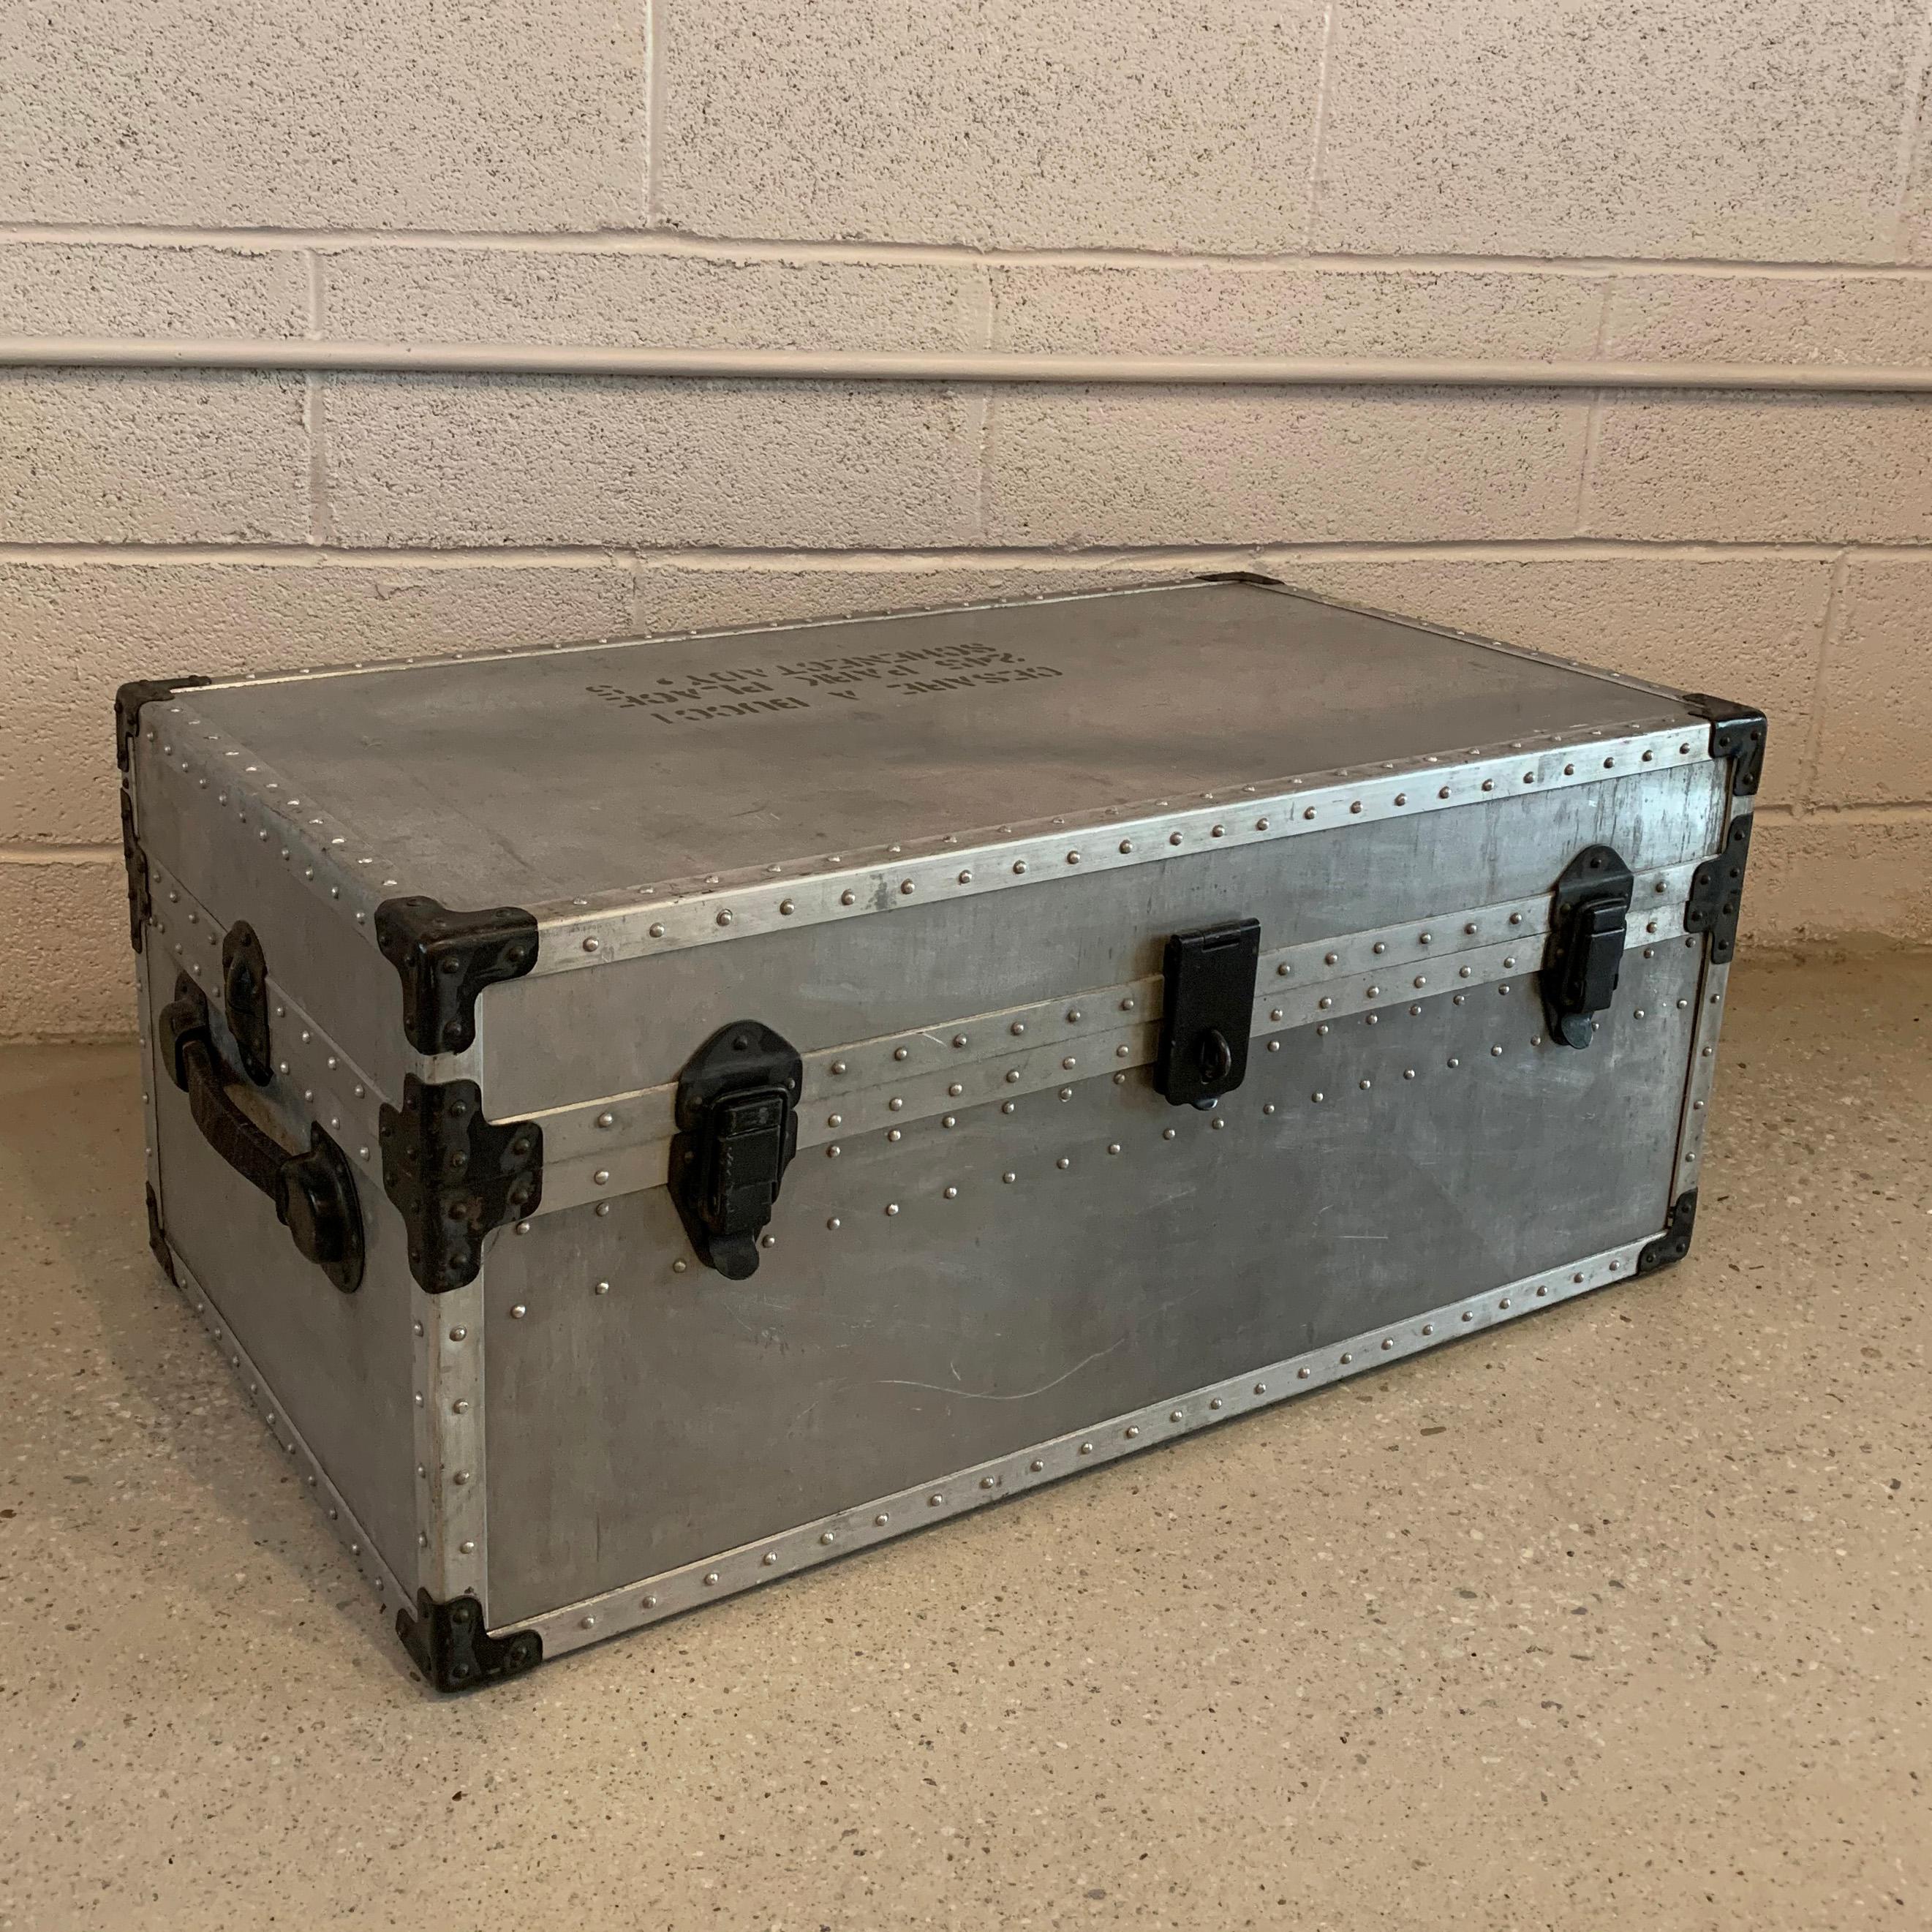 Industrial, aluminum, military trunk features black steel hardware and reinforced edges and leather side handles.